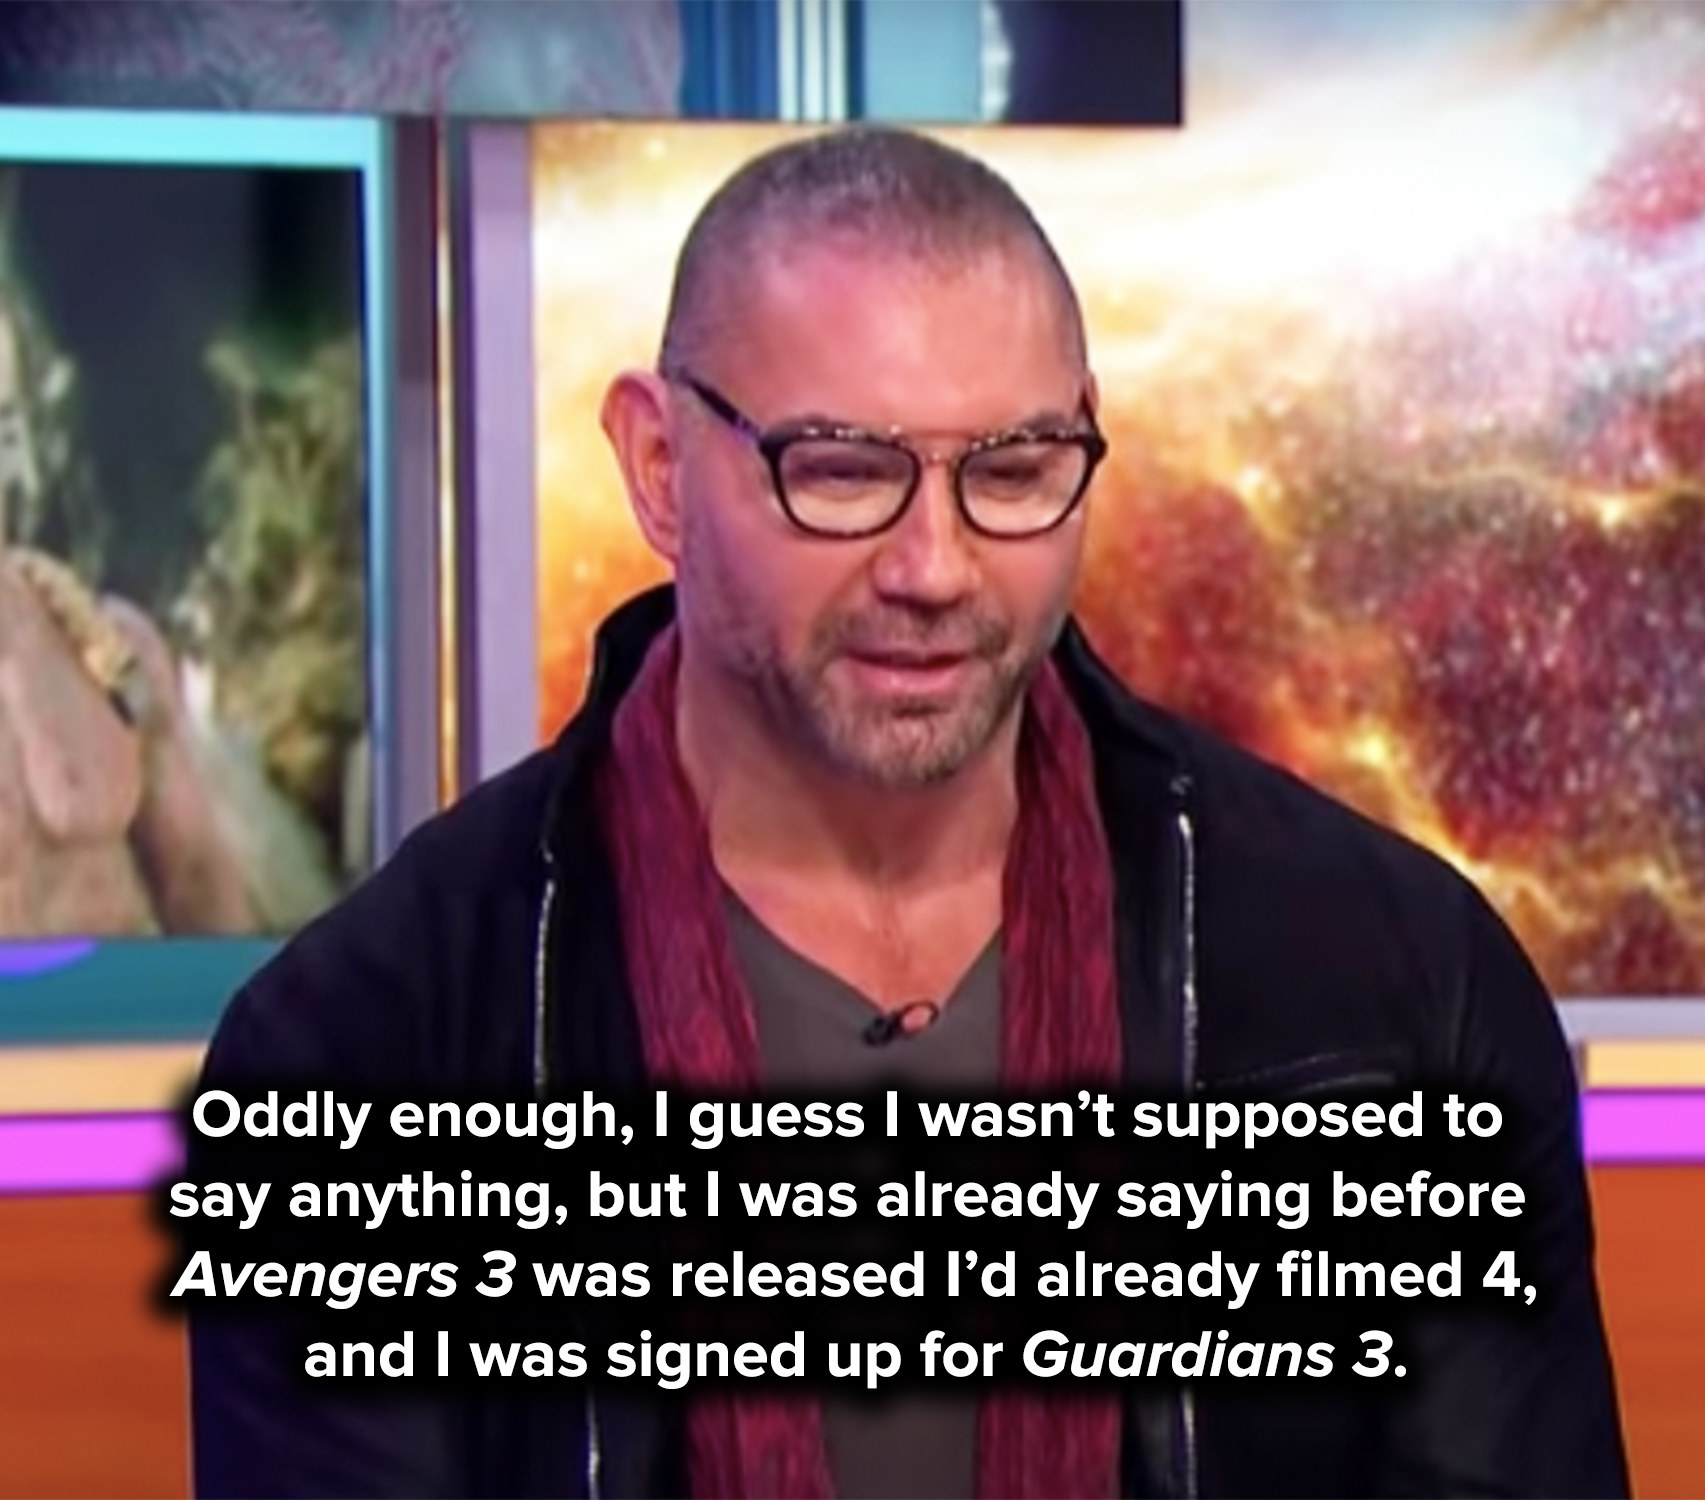 Dave says he&#x27;d already been saying he signed on for Guardians 3